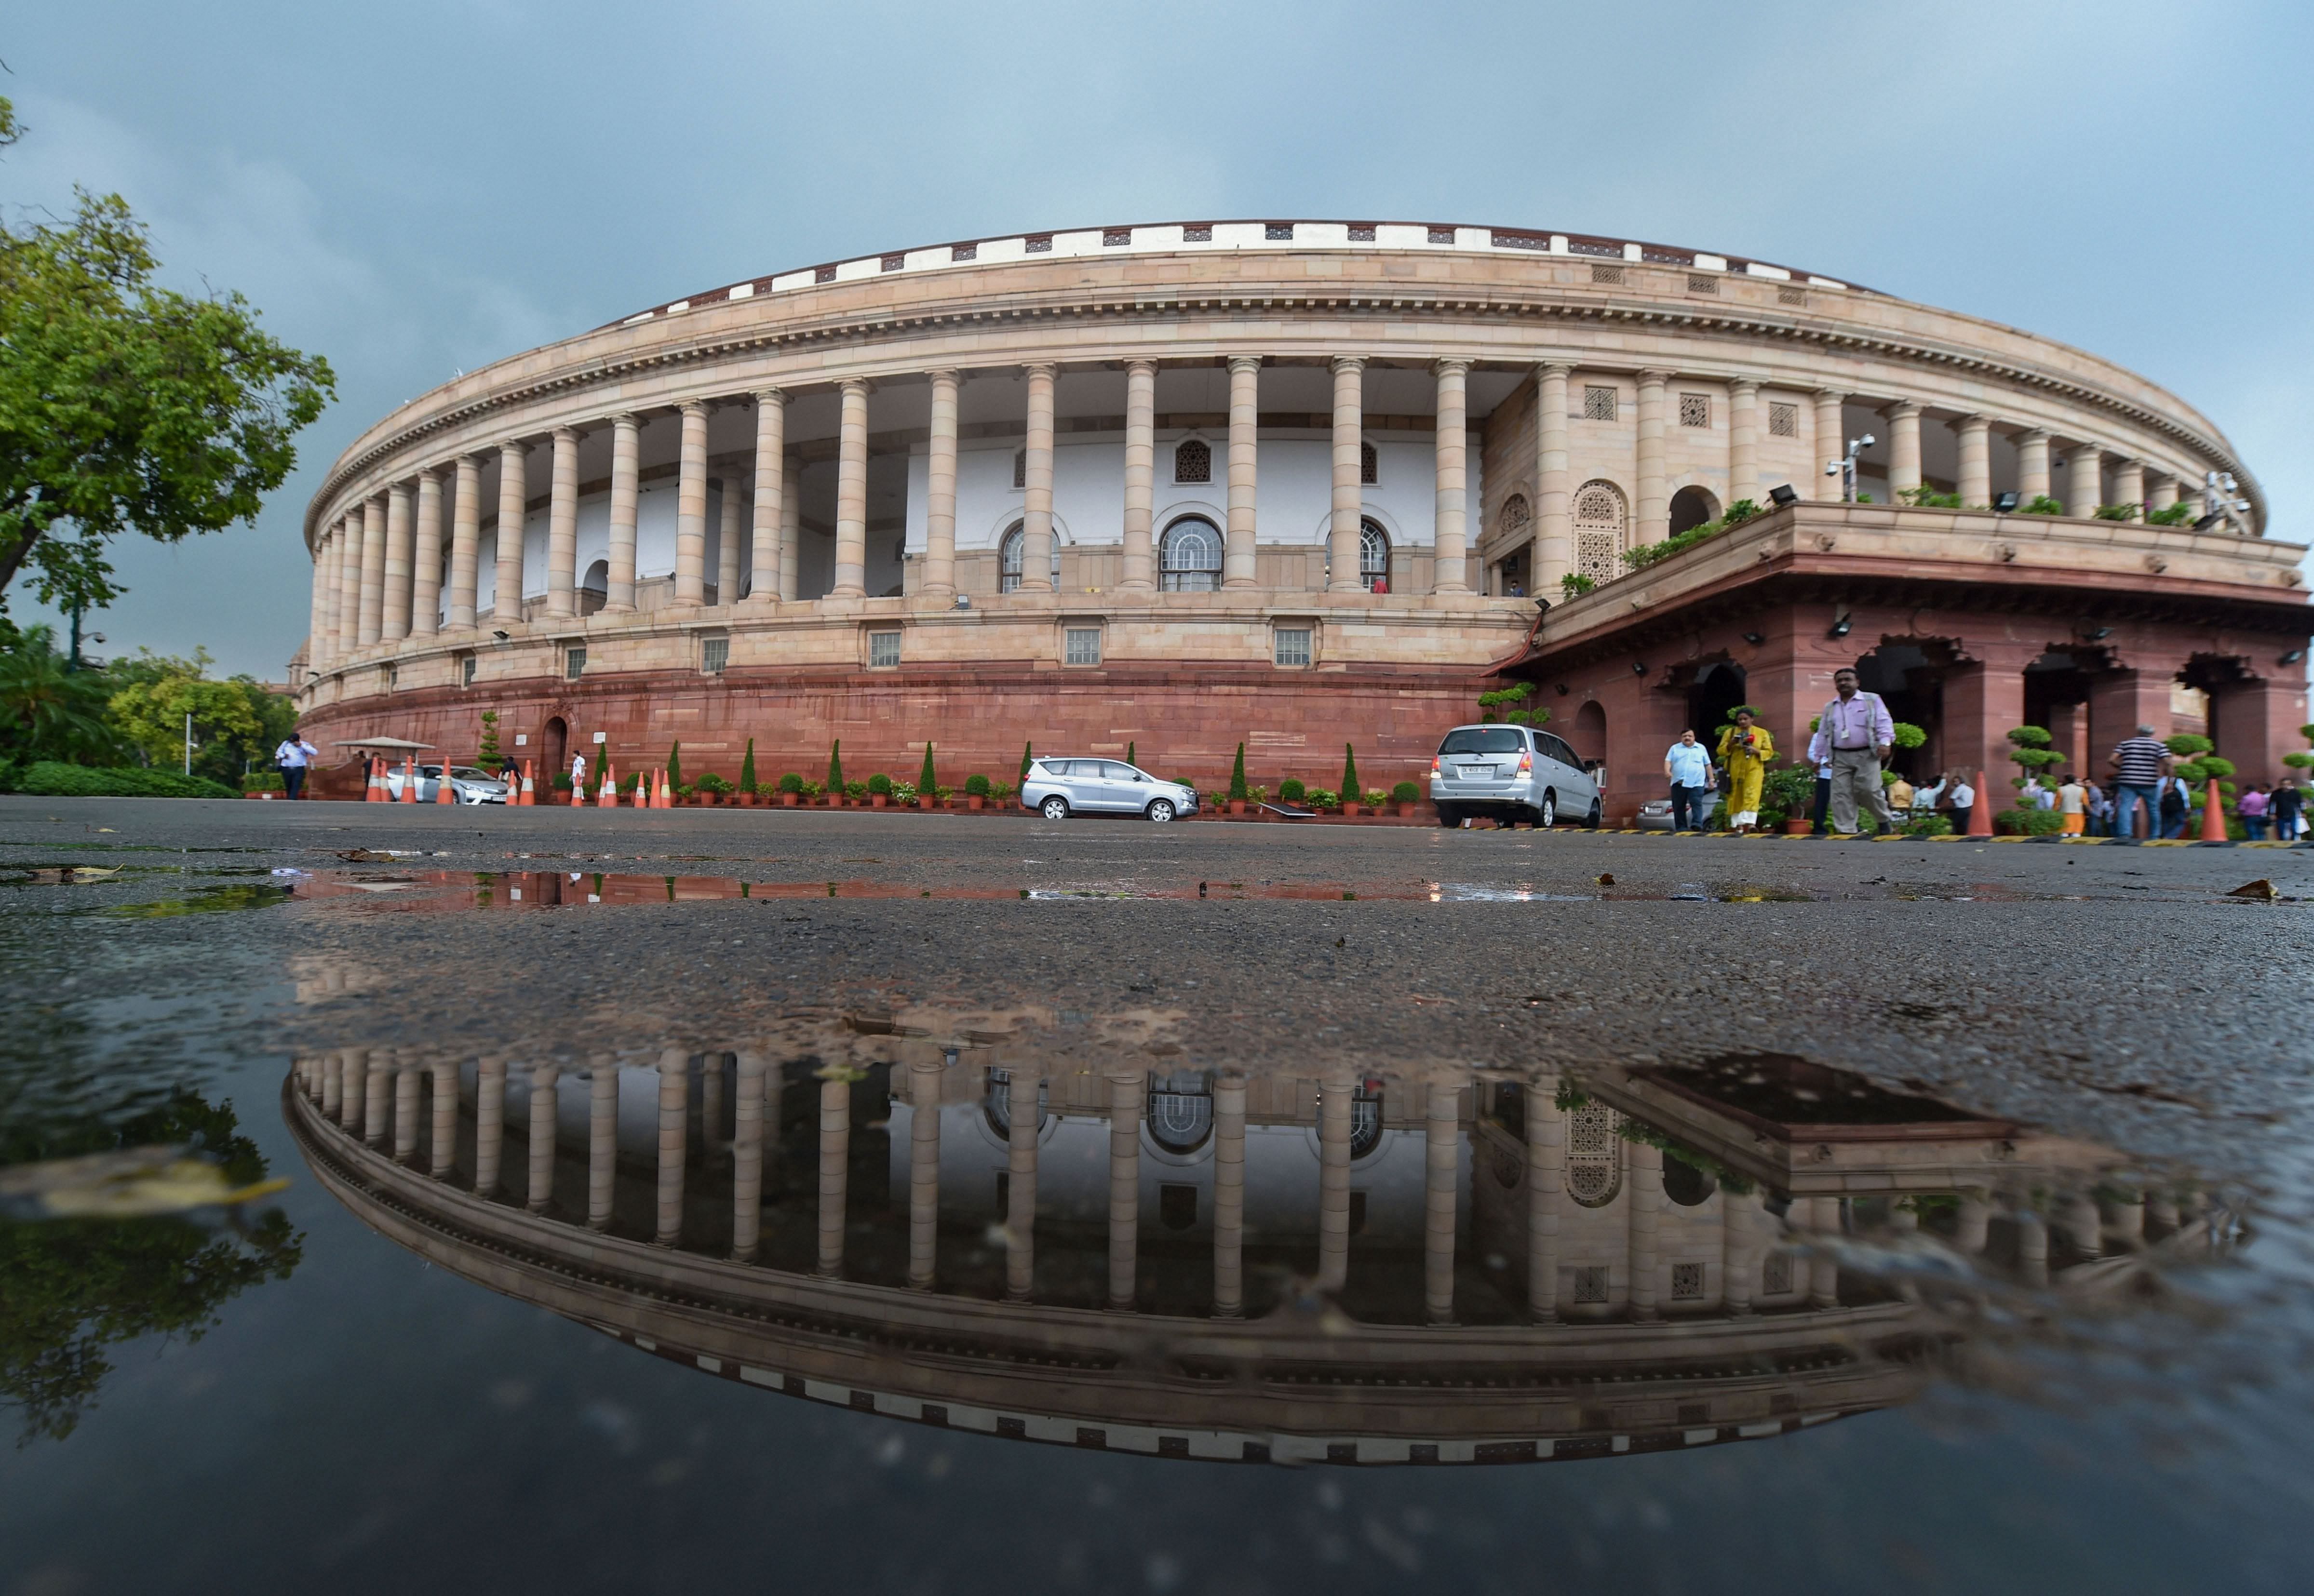  A view of the Parliament House following monsoon rainfall, in New Delhi. (PTI Photo)